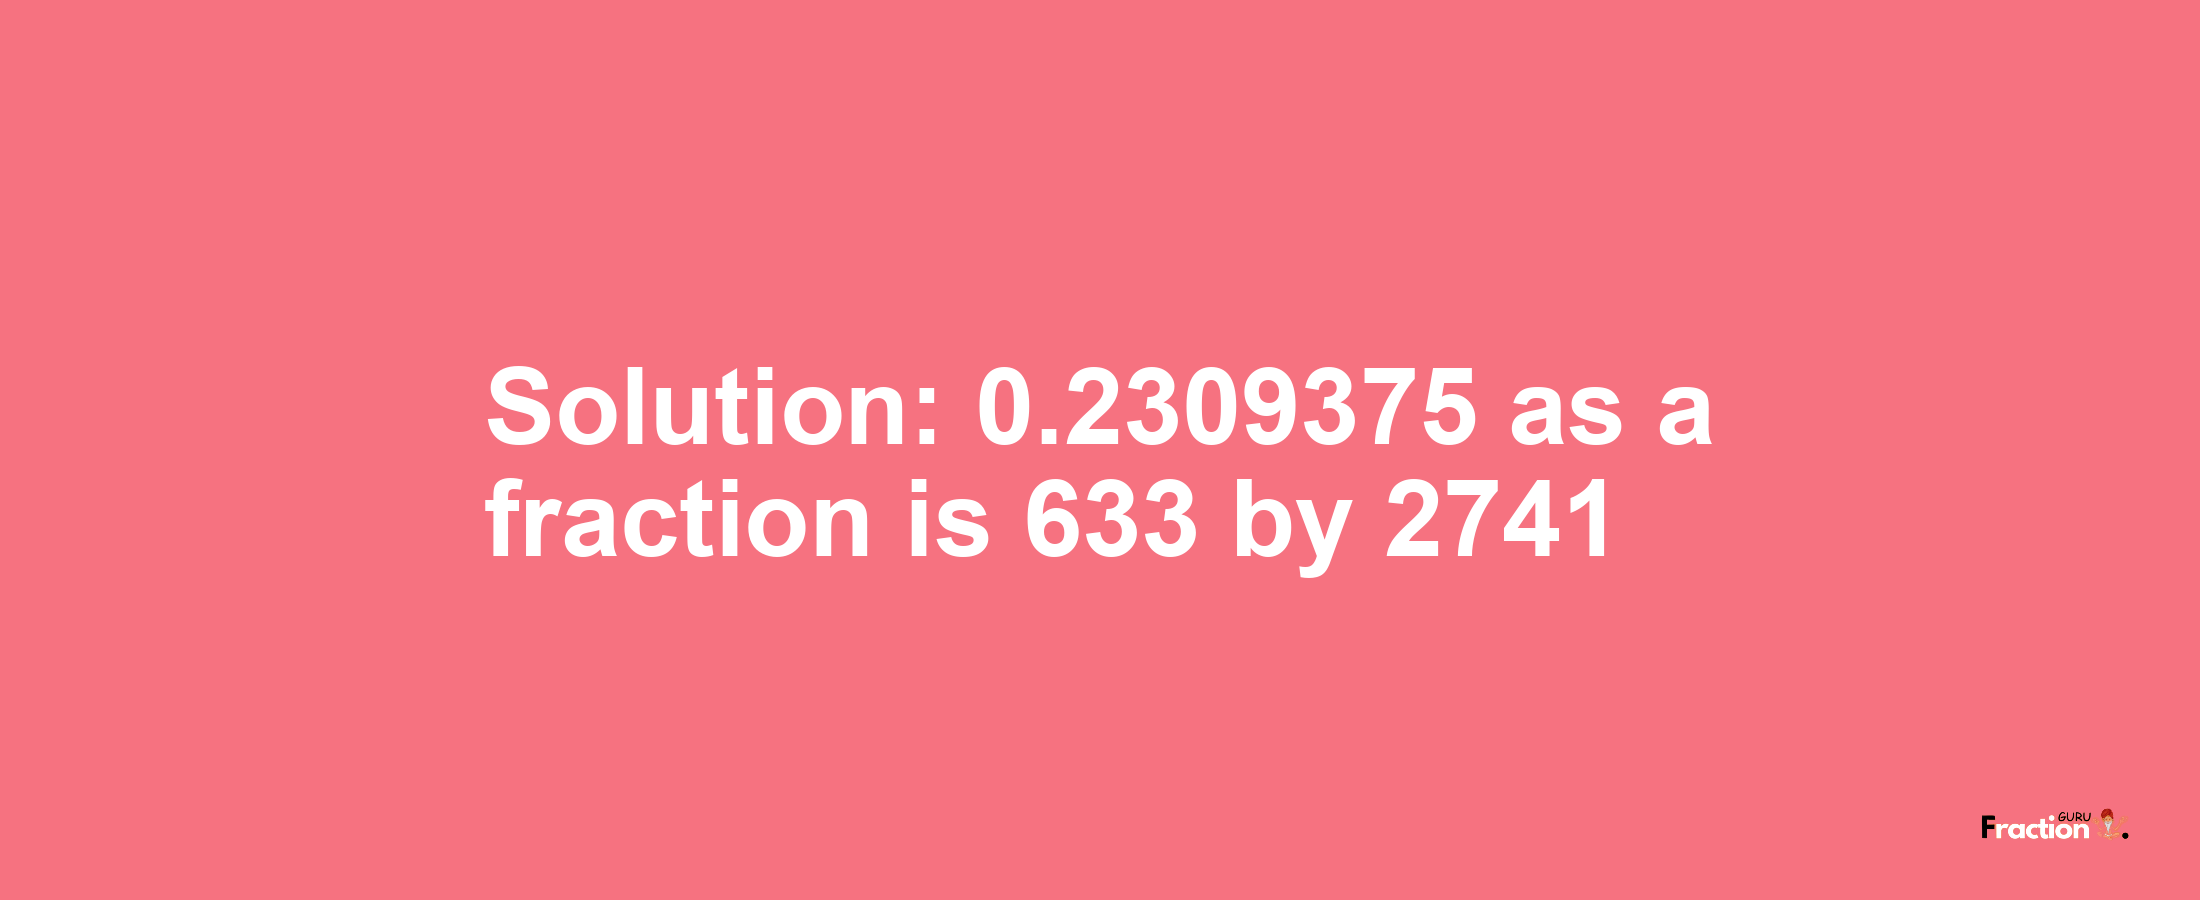 Solution:0.2309375 as a fraction is 633/2741